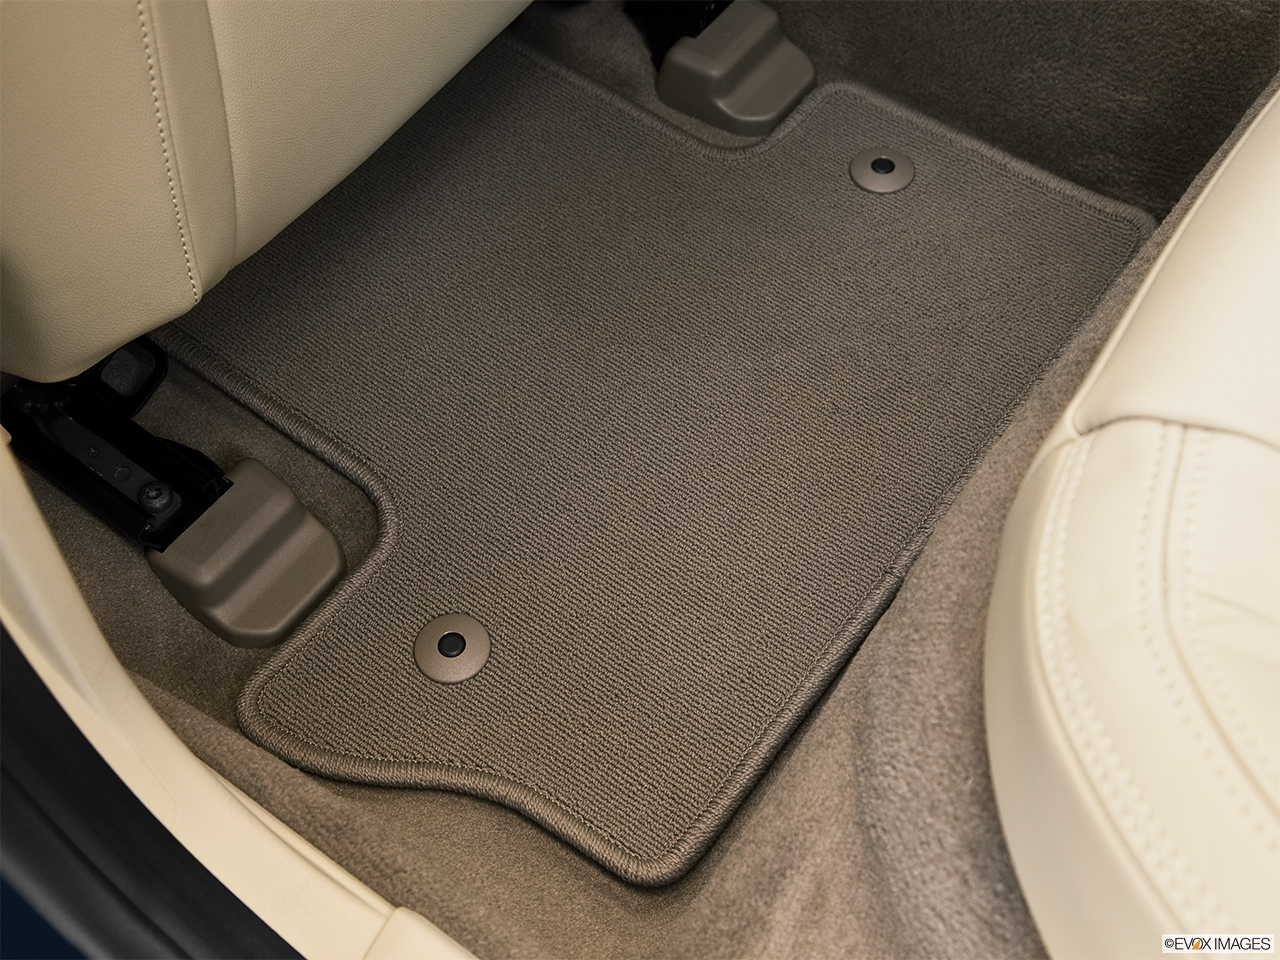 2013 Volvo S60 T5 FWD Premier Rear driver's side floor mat. Mid-seat level from outside looking in. 